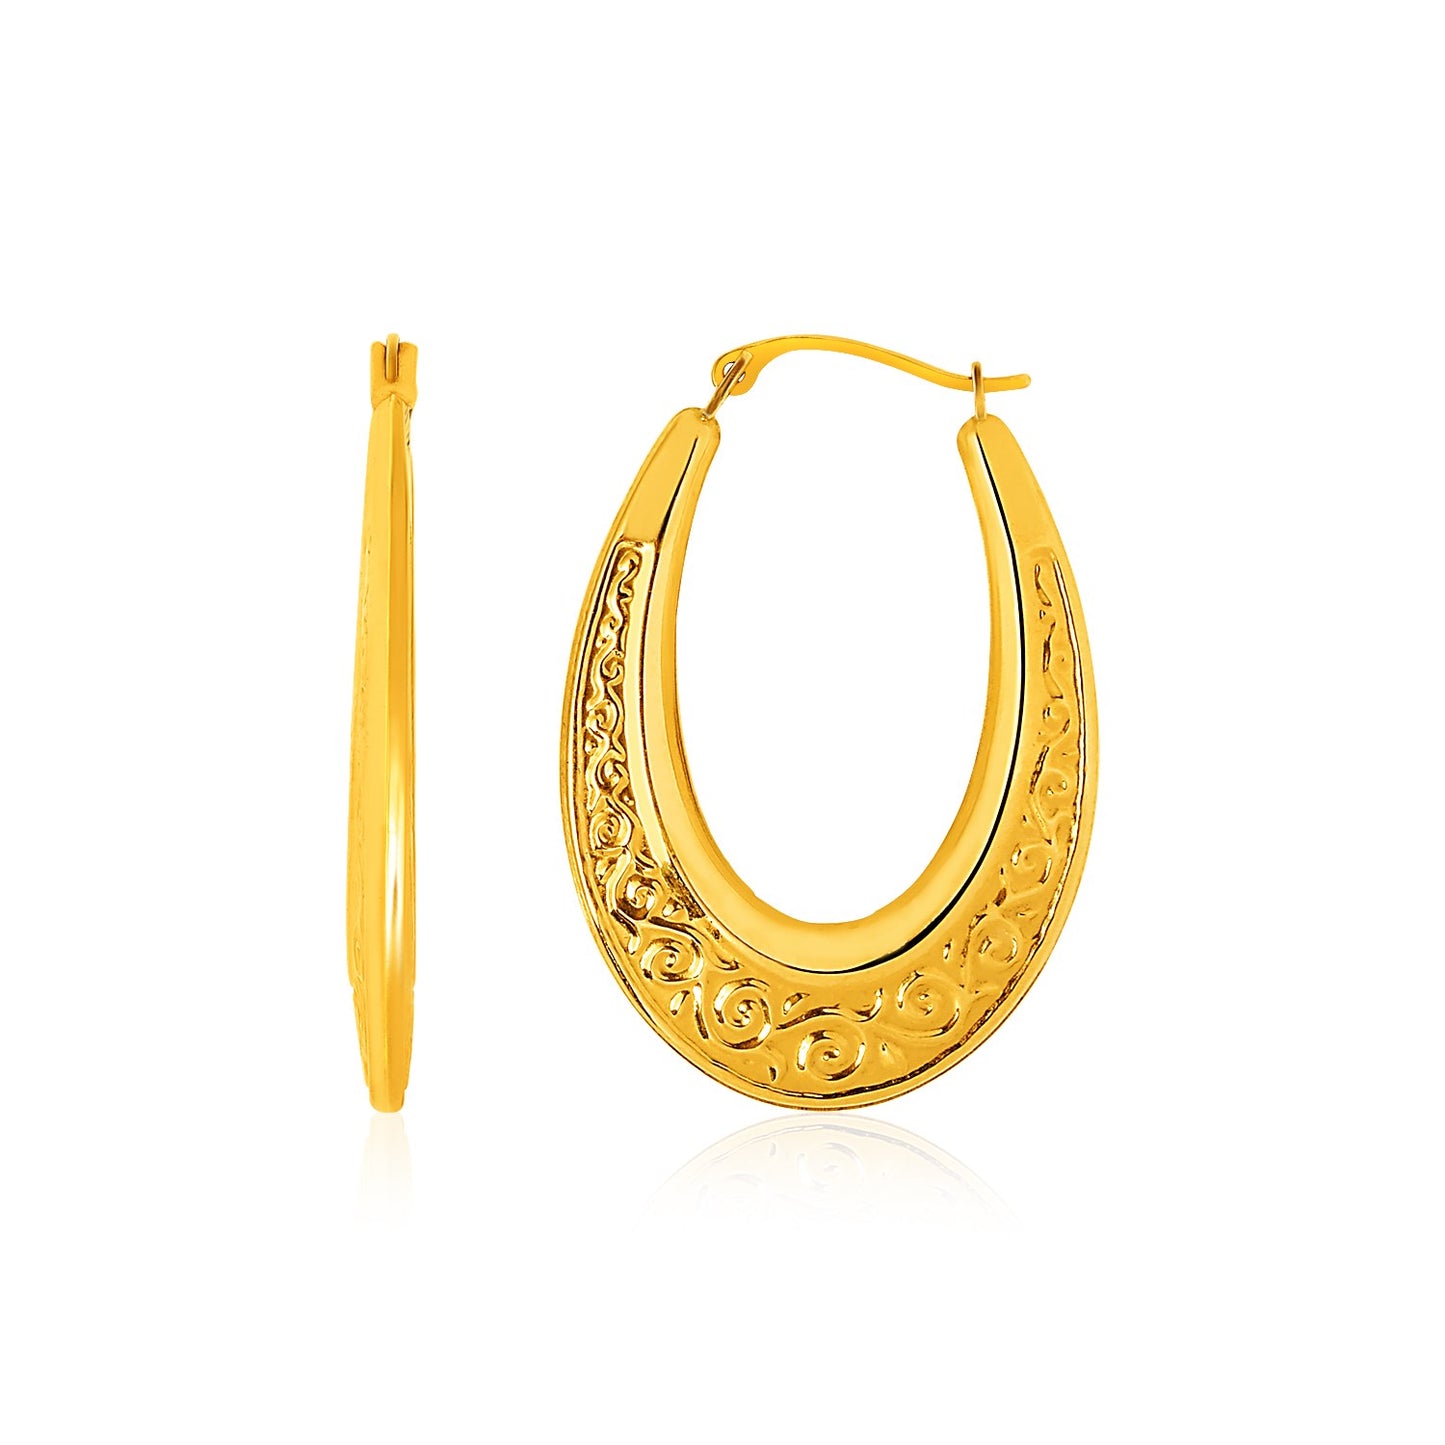 14k Yellow Gold Graduated Oval Hoop Earrings with Swirl Design